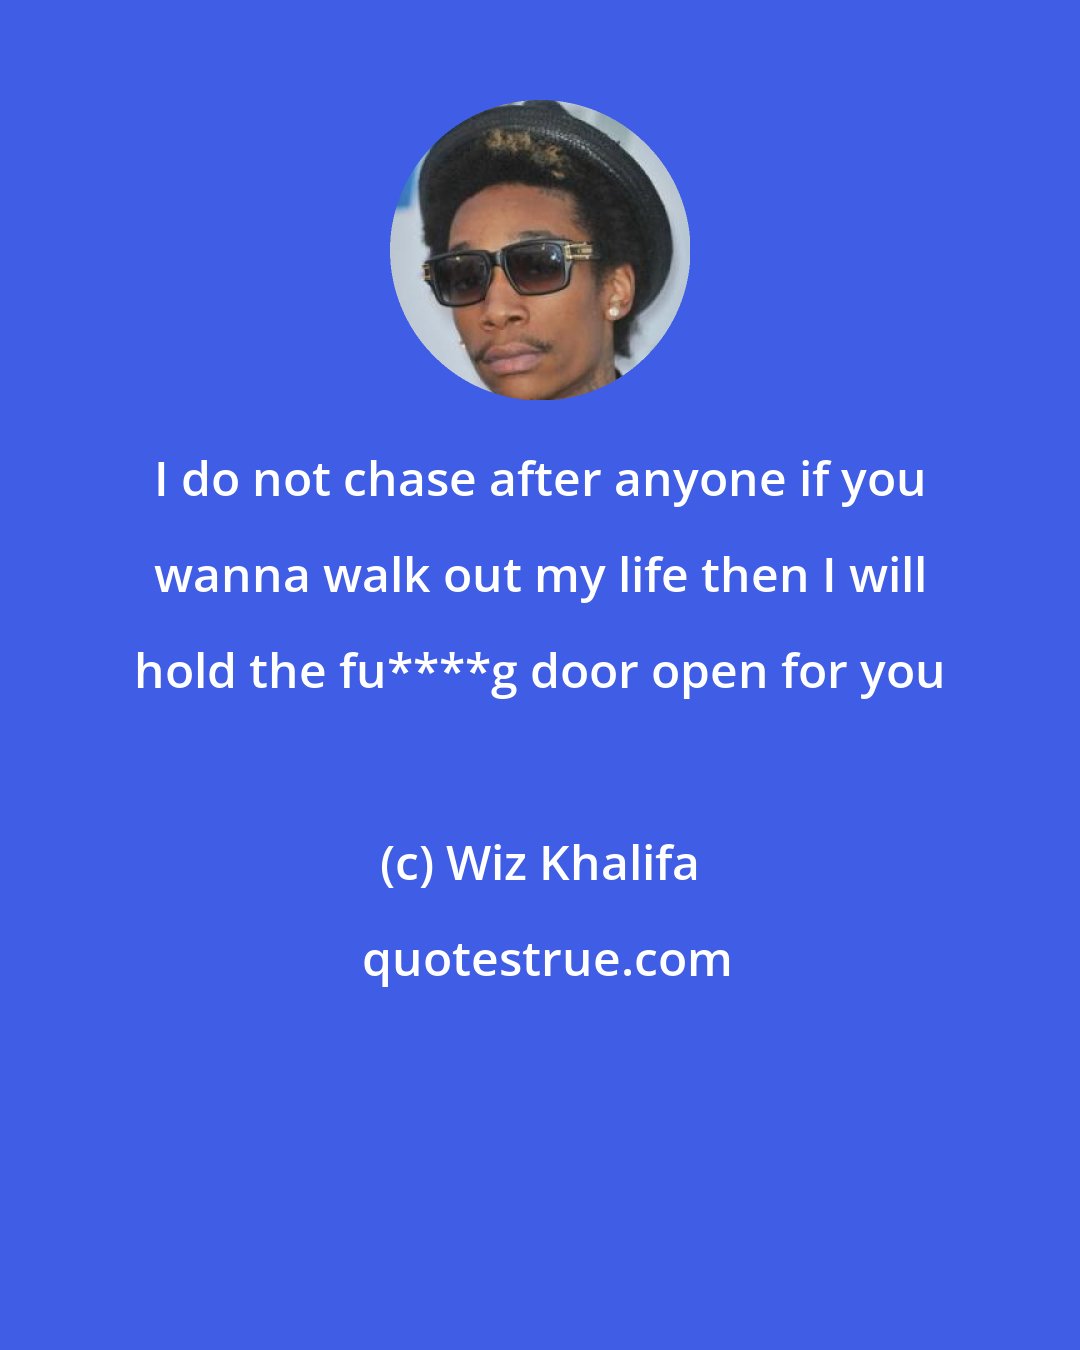 Wiz Khalifa: I do not chase after anyone if you wanna walk out my life then I will hold the fu****g door open for you